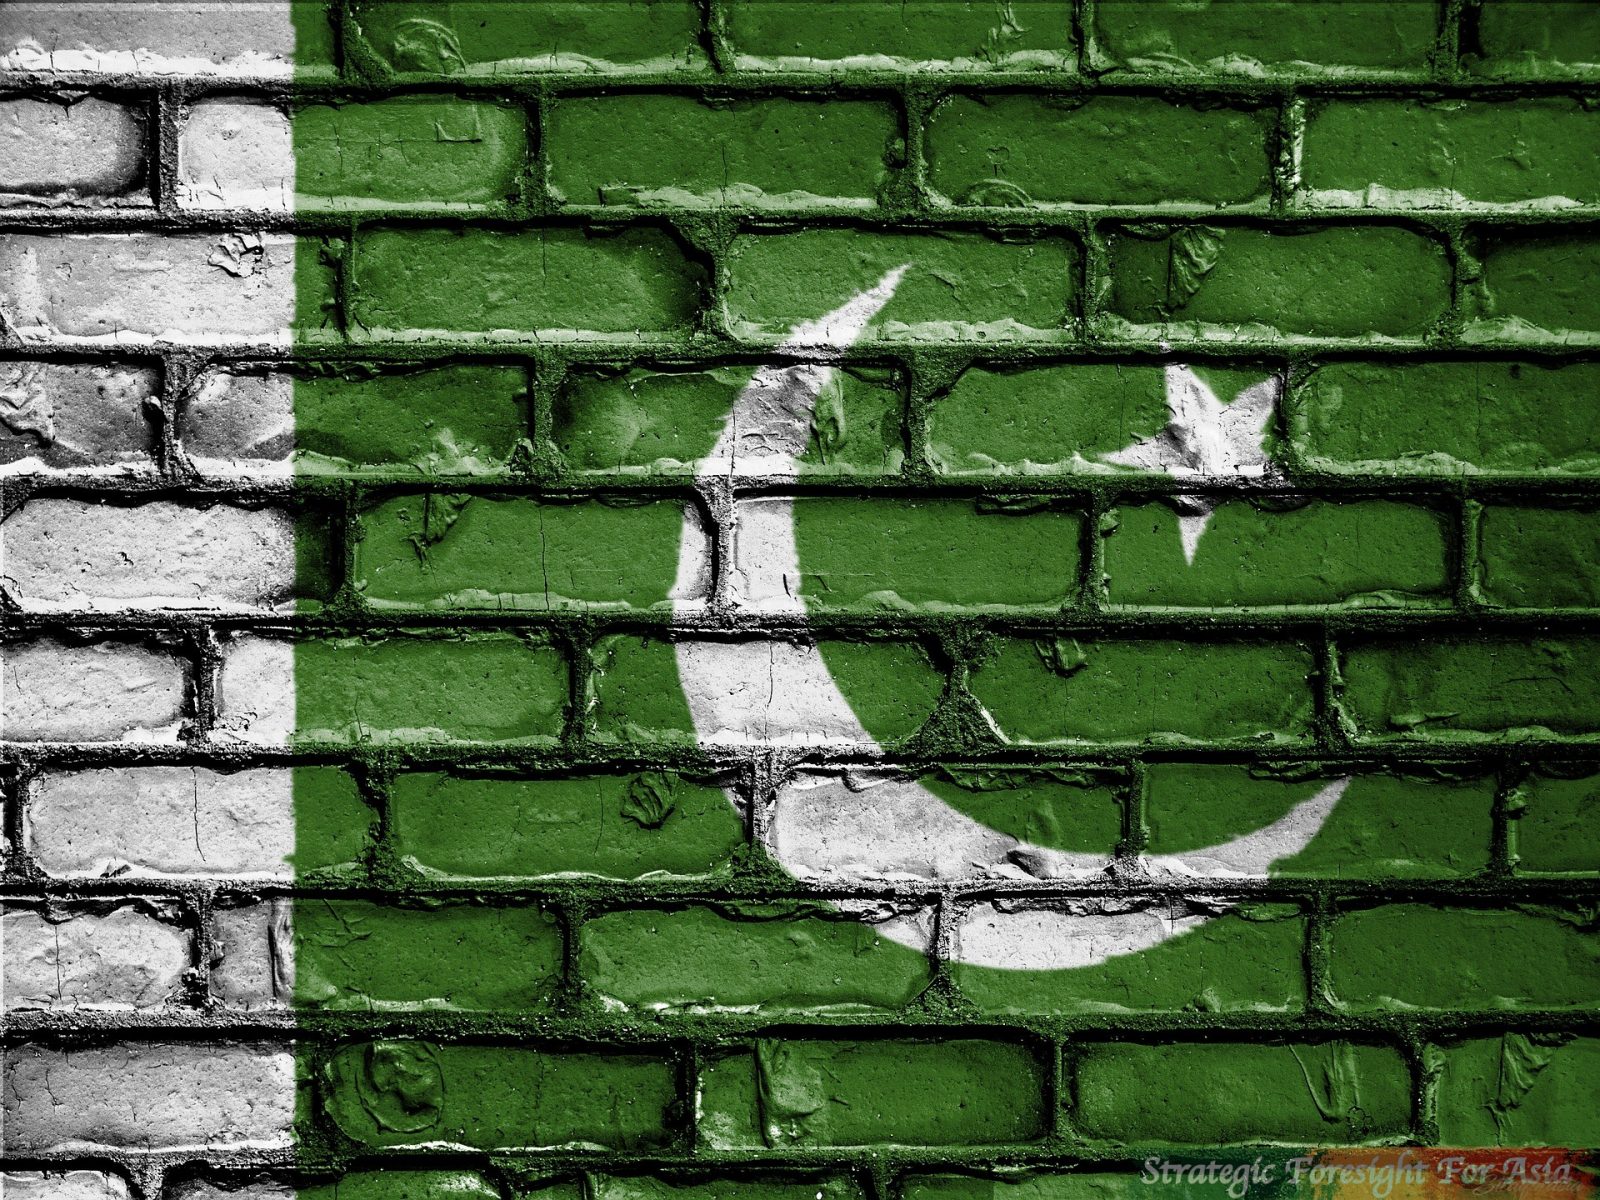 A CEREBRAL APPROACH TO PUSHING THE PAKISTAN NARRATIVE